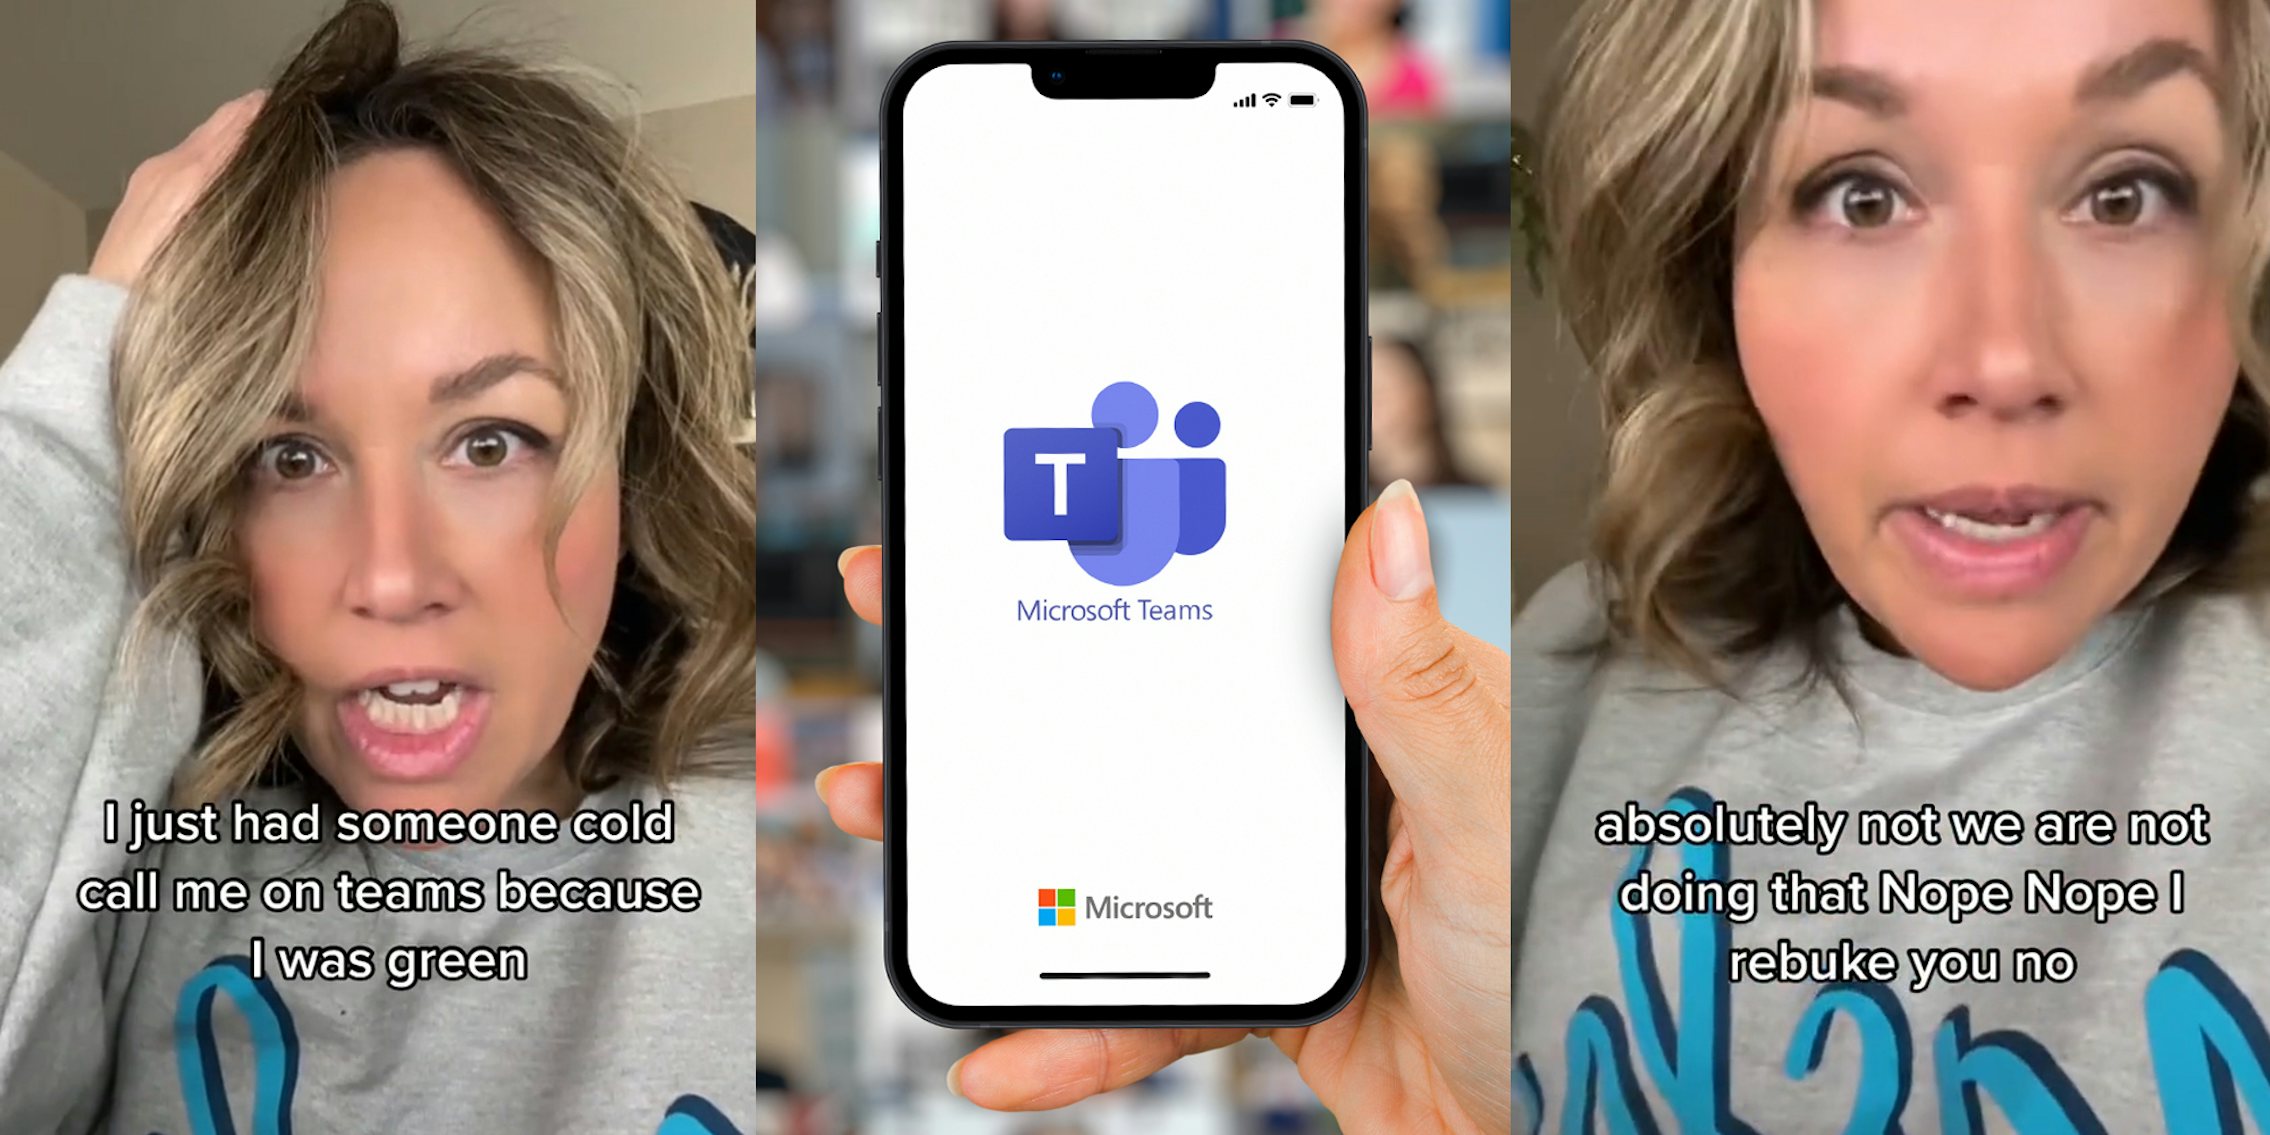 person with hand on head with caption 'I just had someone cold call me on teams because I was green' (l) Microsoft Teams on phone in hand in front of call on computer screen (c) person speaking with caption 'absolutely not we are not doing that Nope Nope I rebuke you no' (r)